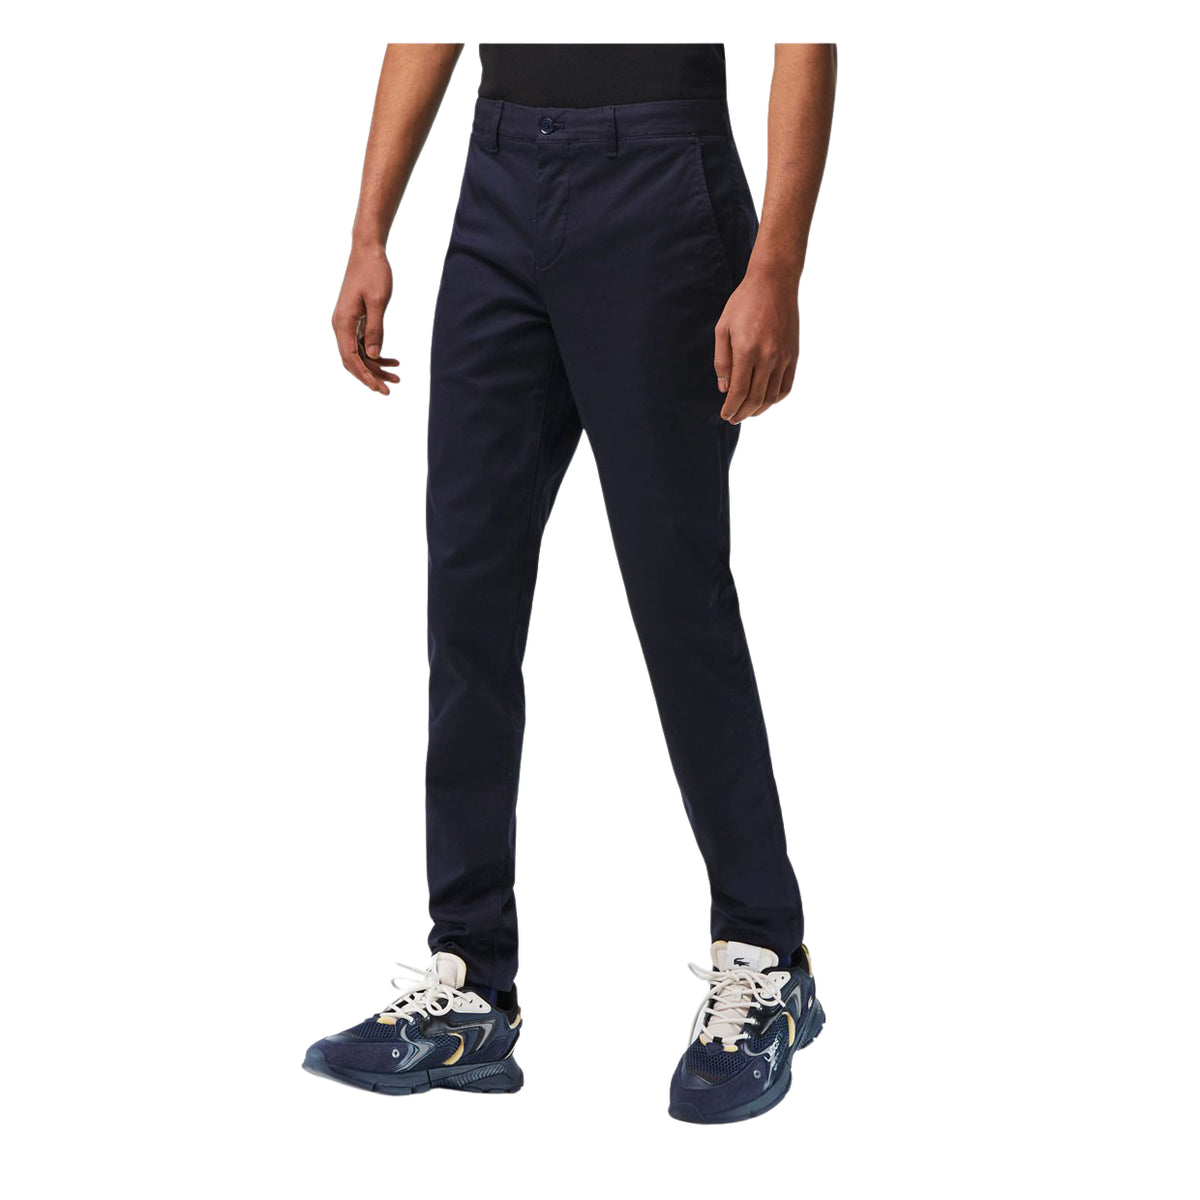 Men's Lacoste Chino Slim Fit New Classic Blue (HDE) Pants on